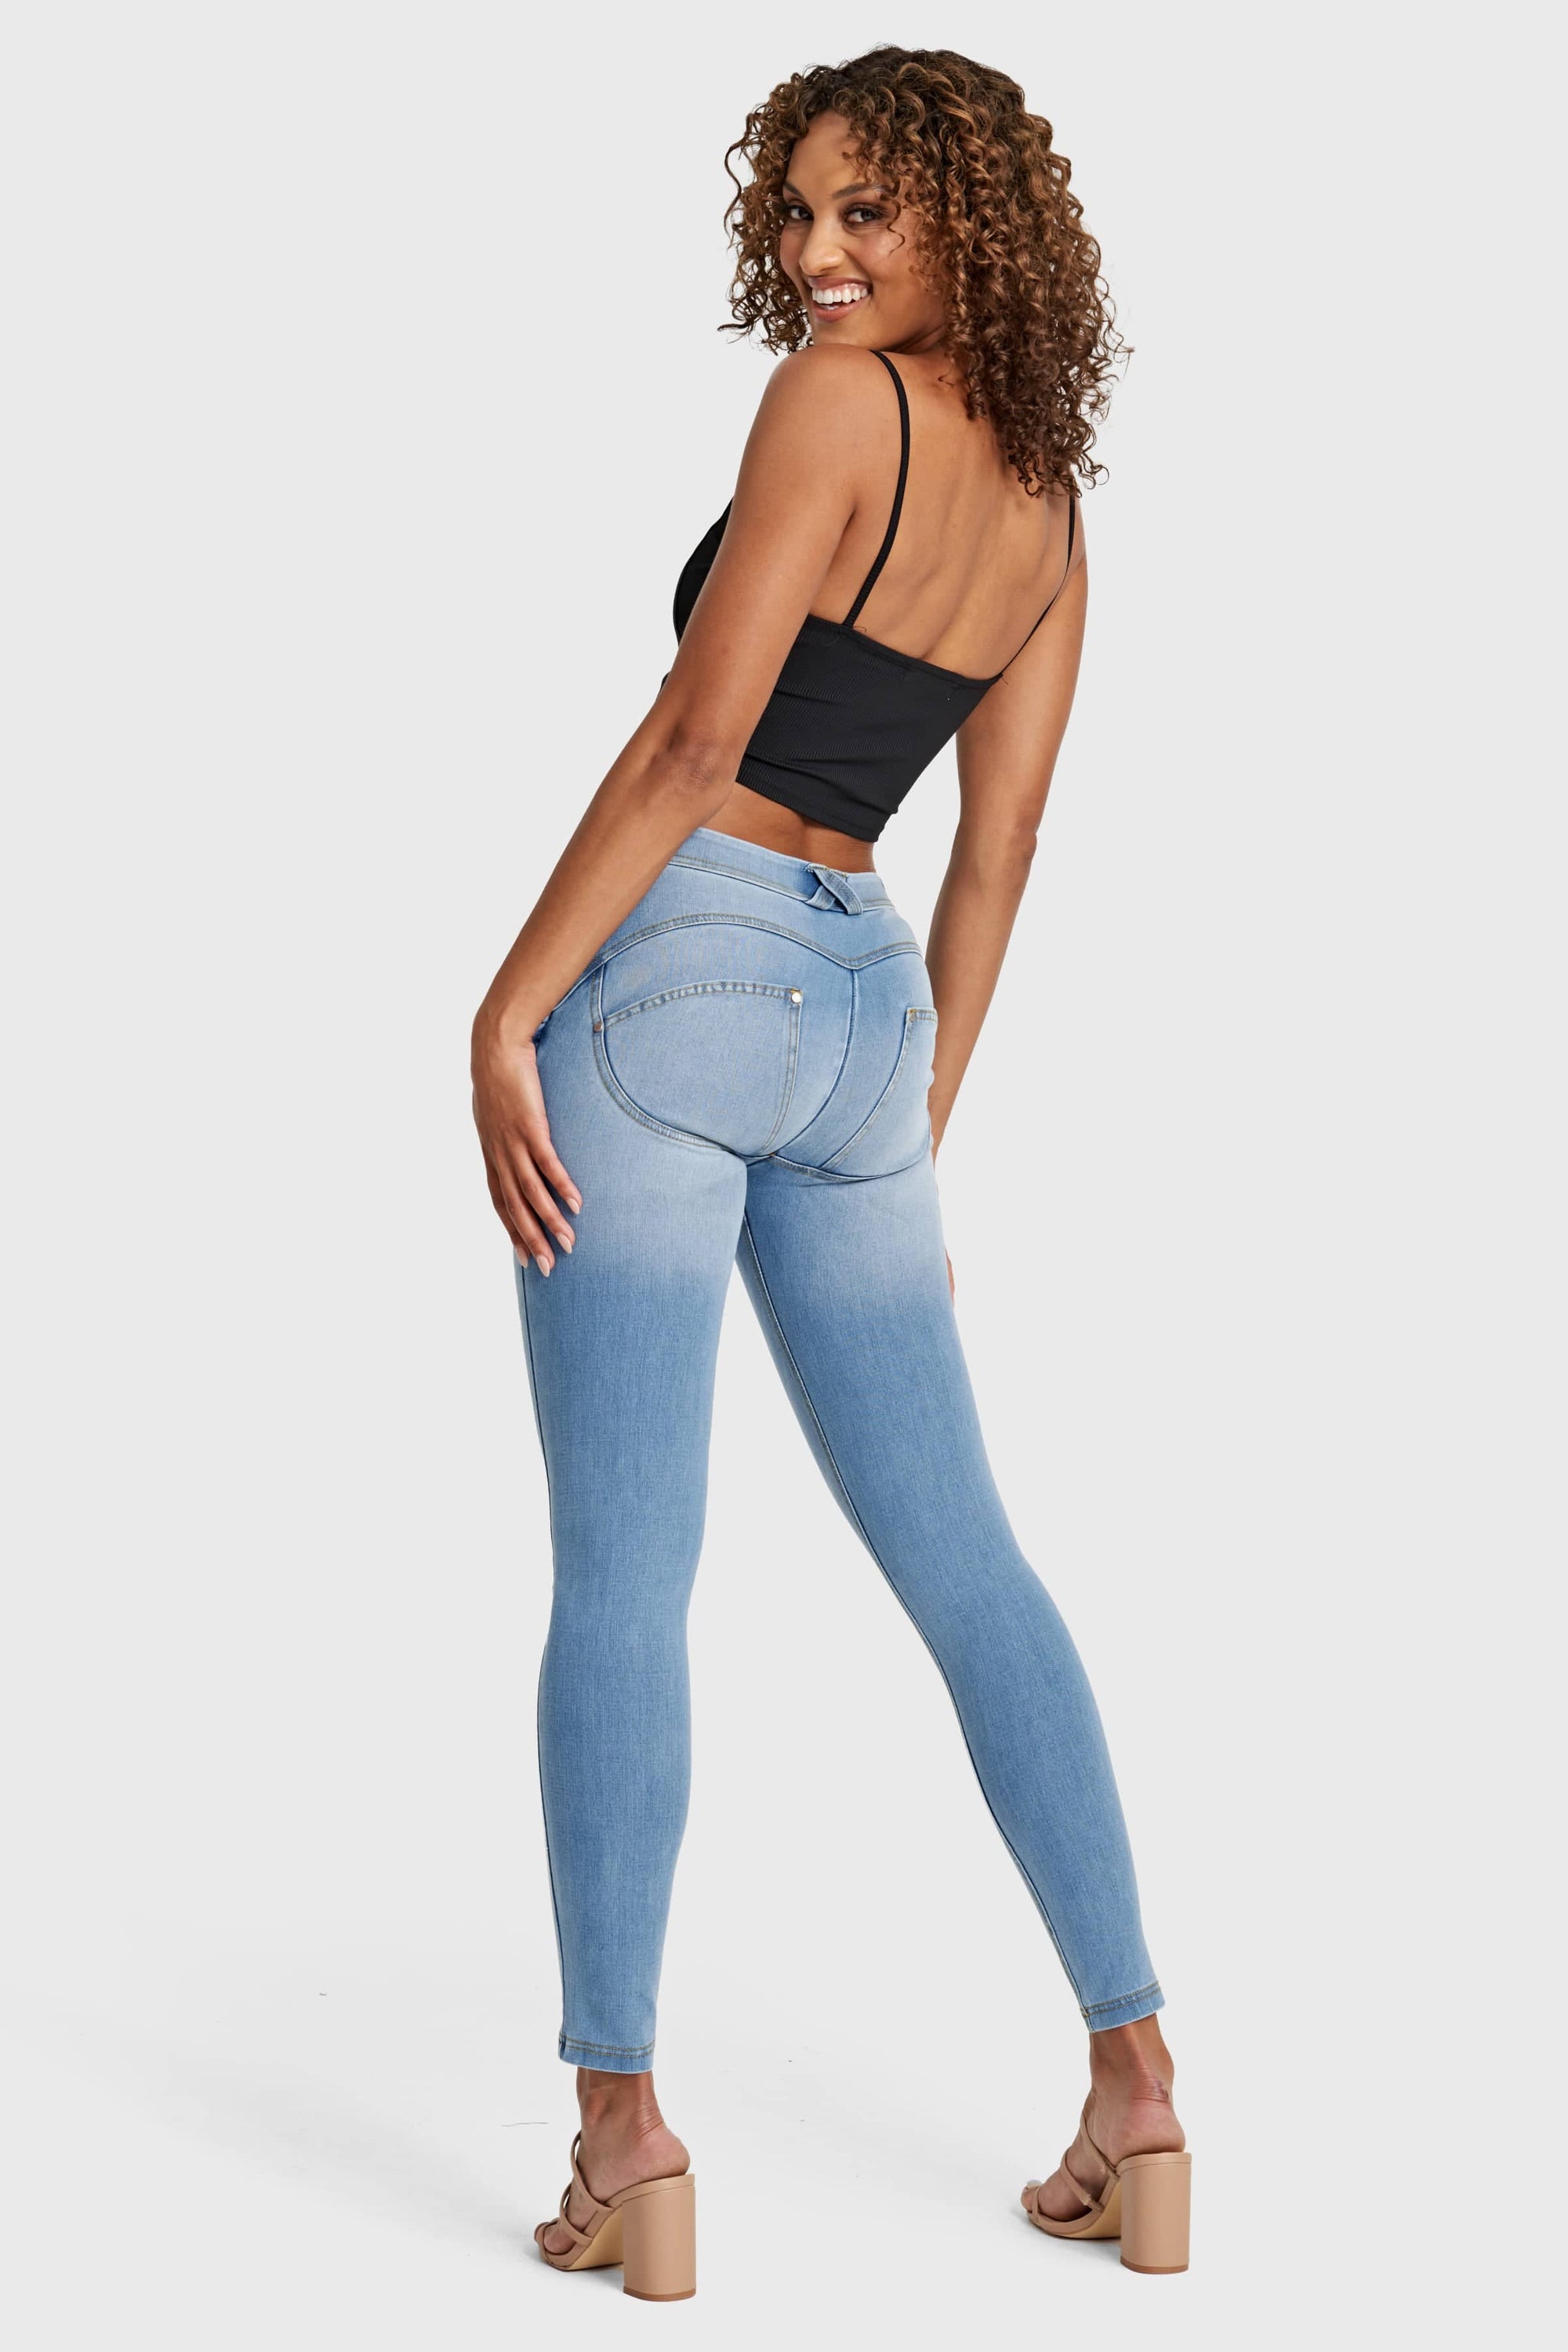 WR.UP® Snug Jeans - Mid Rise - Full Length - Light Blue + Yellow Stitching 10